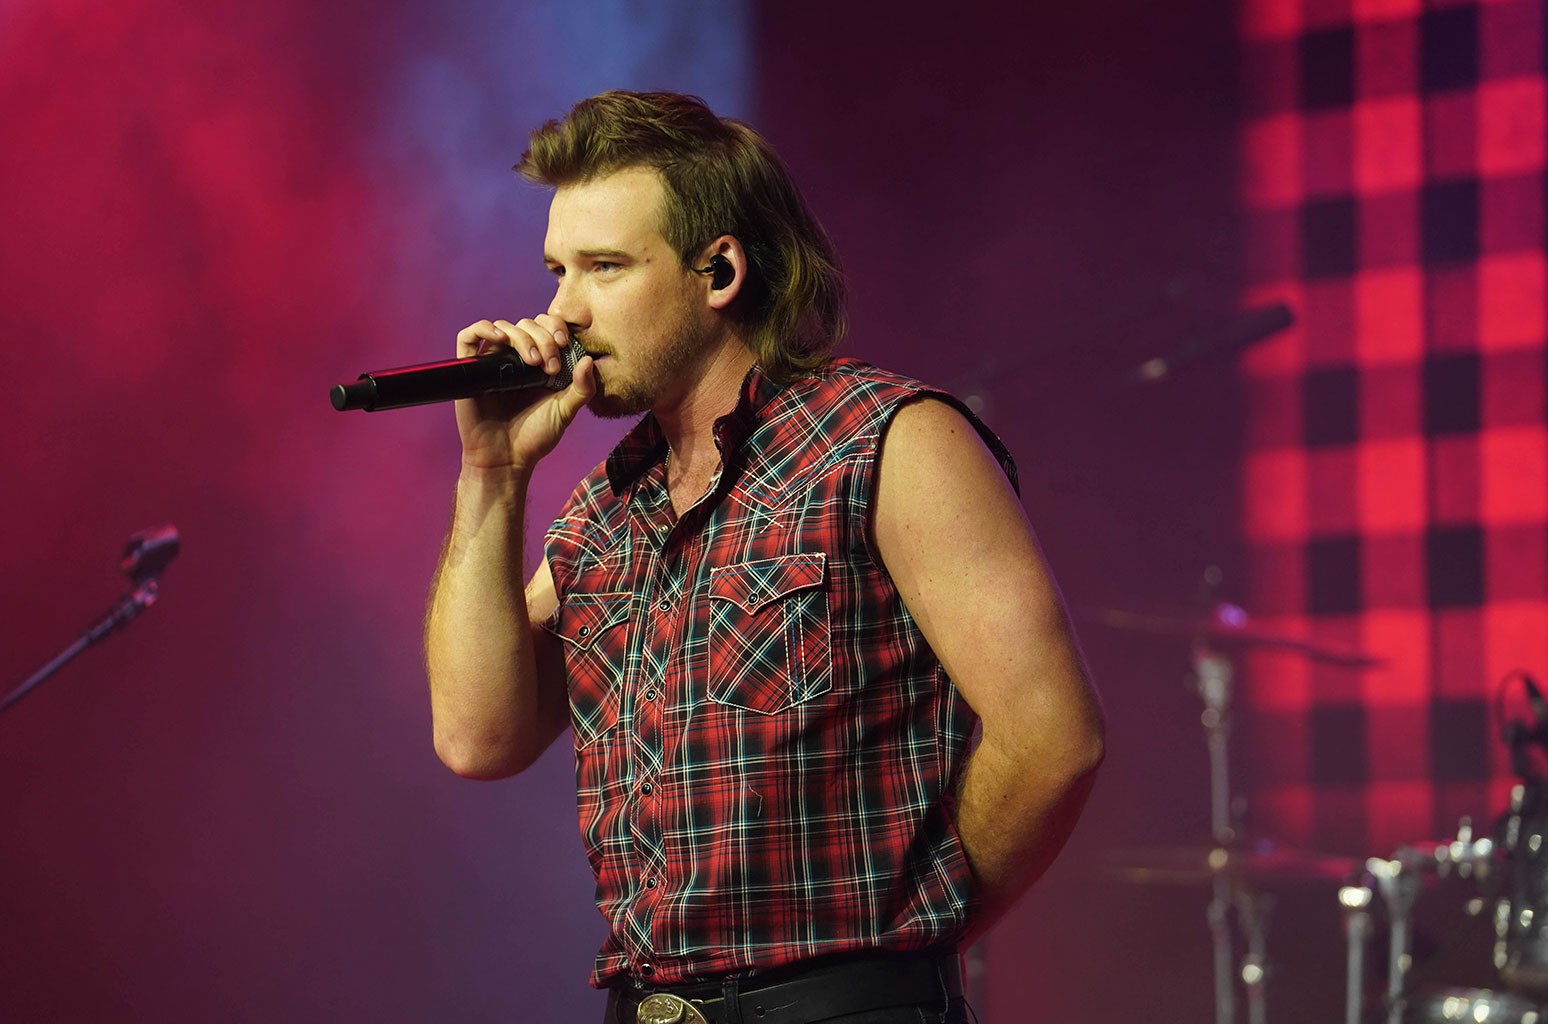 Morgan Wallen won’t be invited to ceremony of Billboard Music Award due to ‘recent conduct’